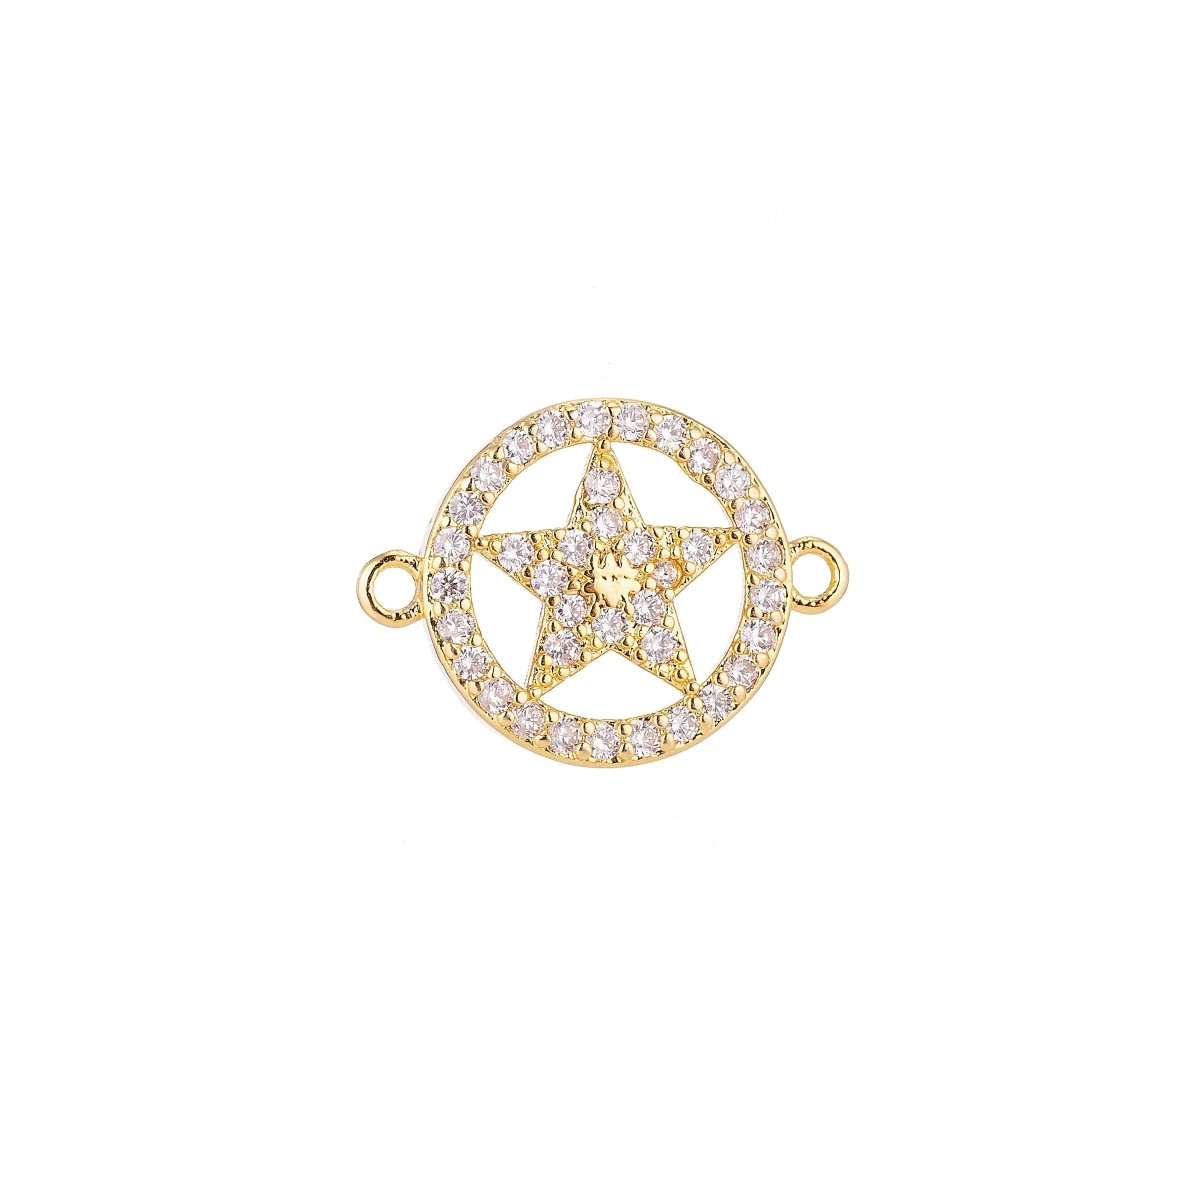 Gold Filled Lovely Elegant Star in Circle Floating Cubic Zirconia Bracelet Charm Necklace Pendant for Jewelry Findings Making, F-035 - DLUXCA